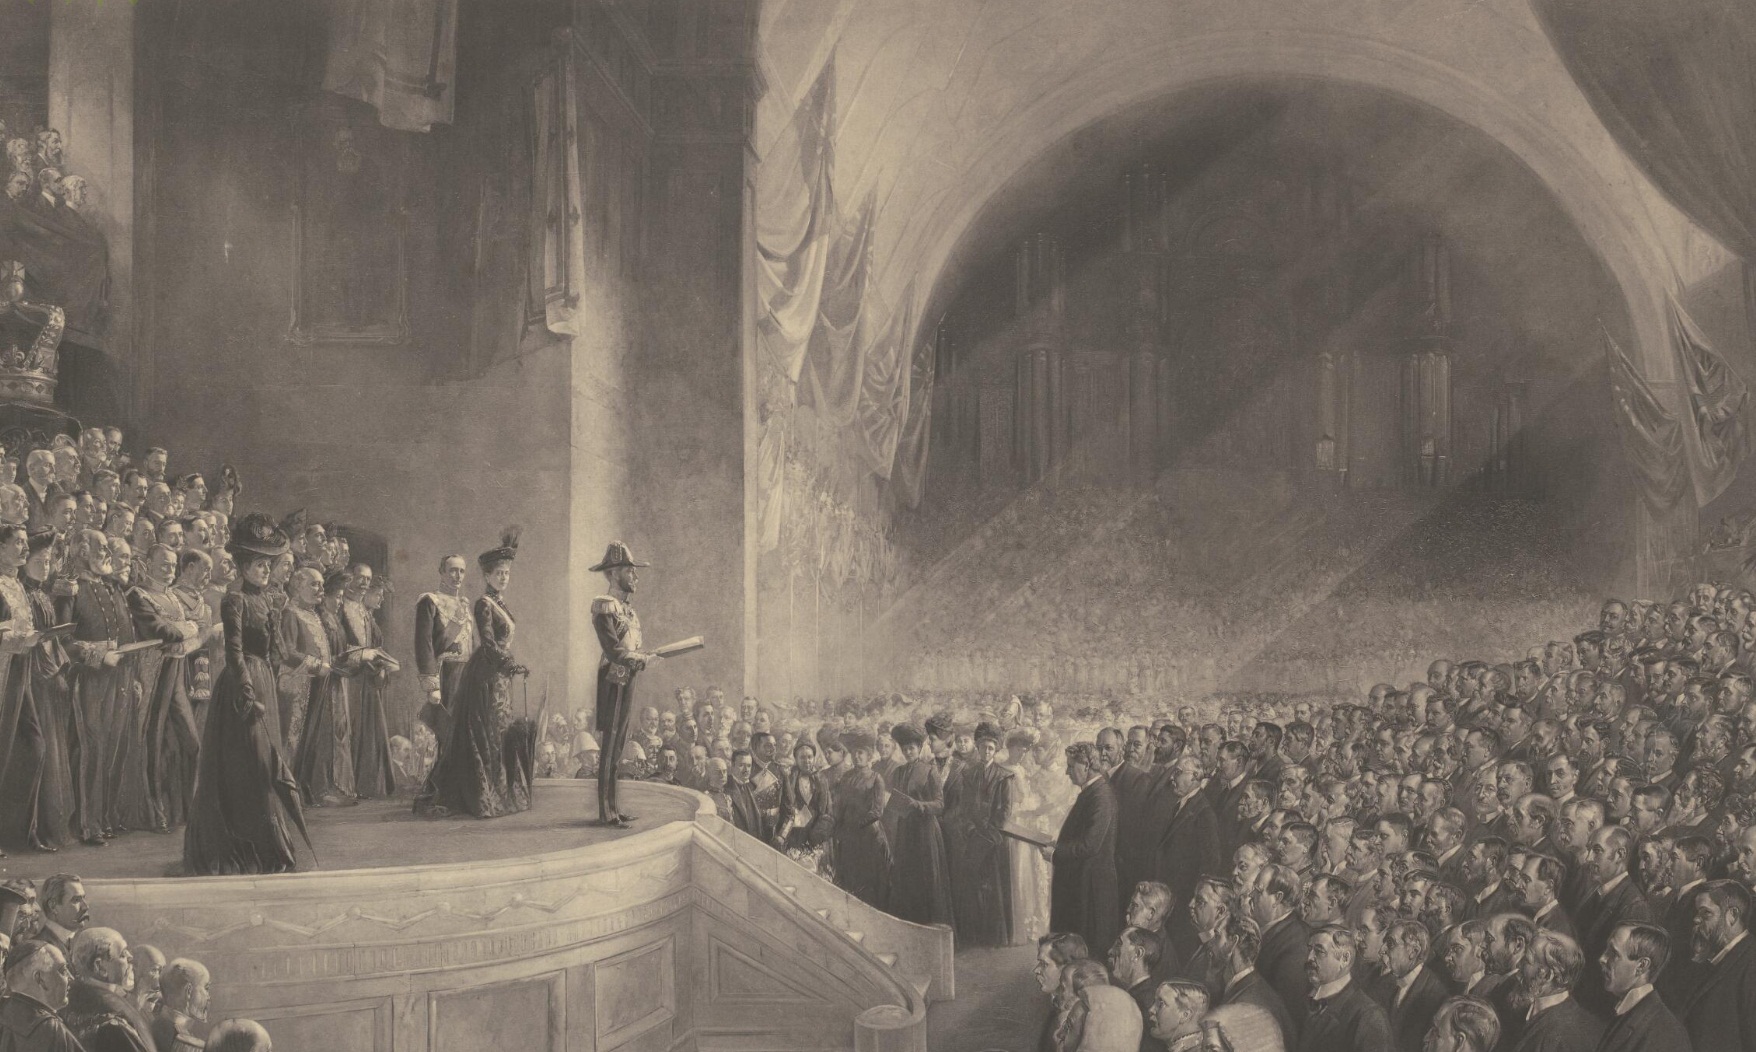 black and white etching showing a man in military dress addressing a crowd of gathered dignitaries in a large cavernous building.